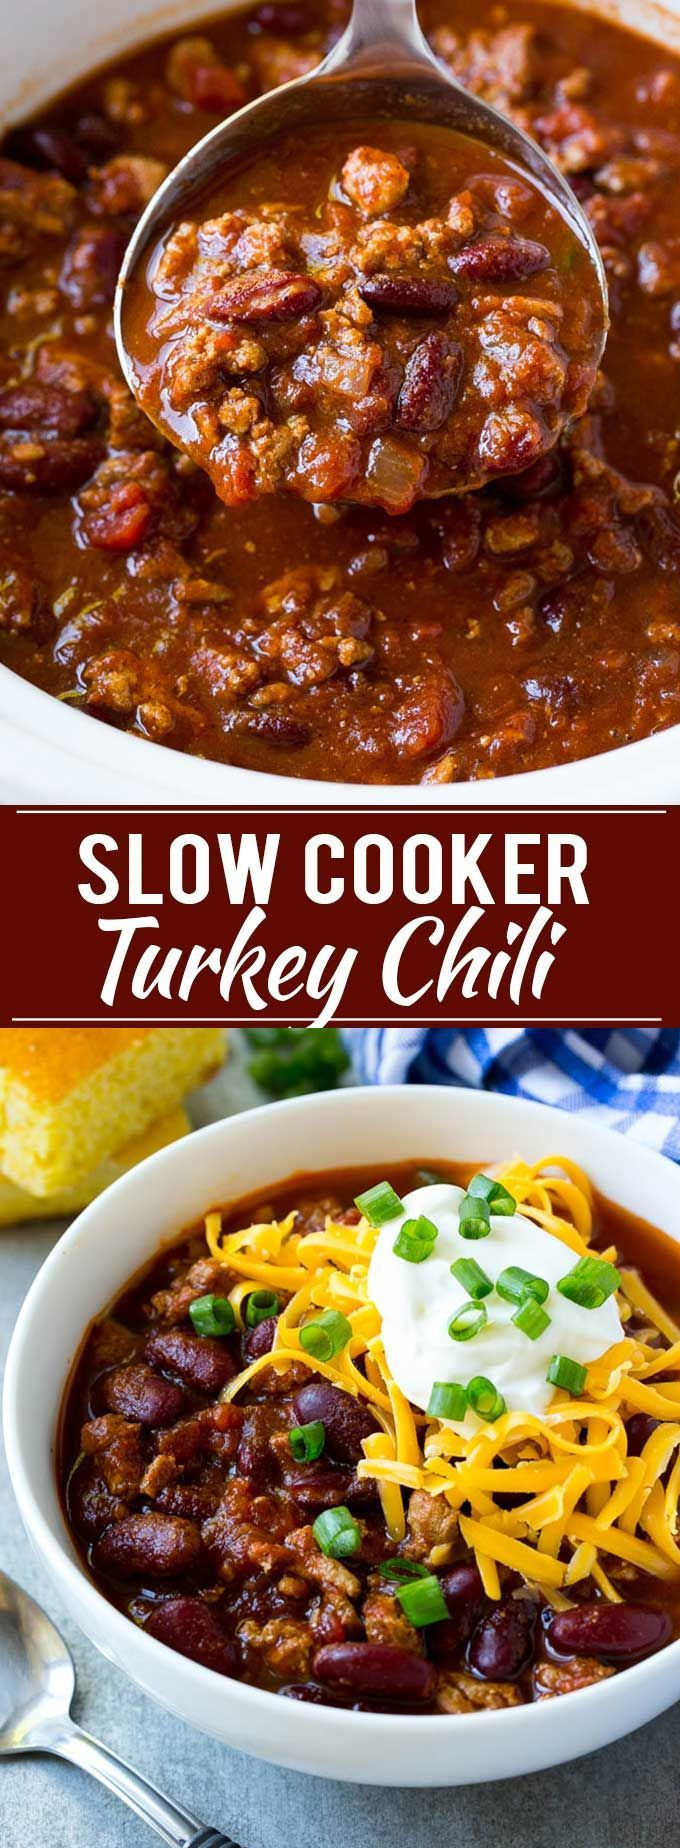 Slow Cooker Turkey Chili Recipe
 Slow Cooker Turkey Chili Recipe Crockpot Chili